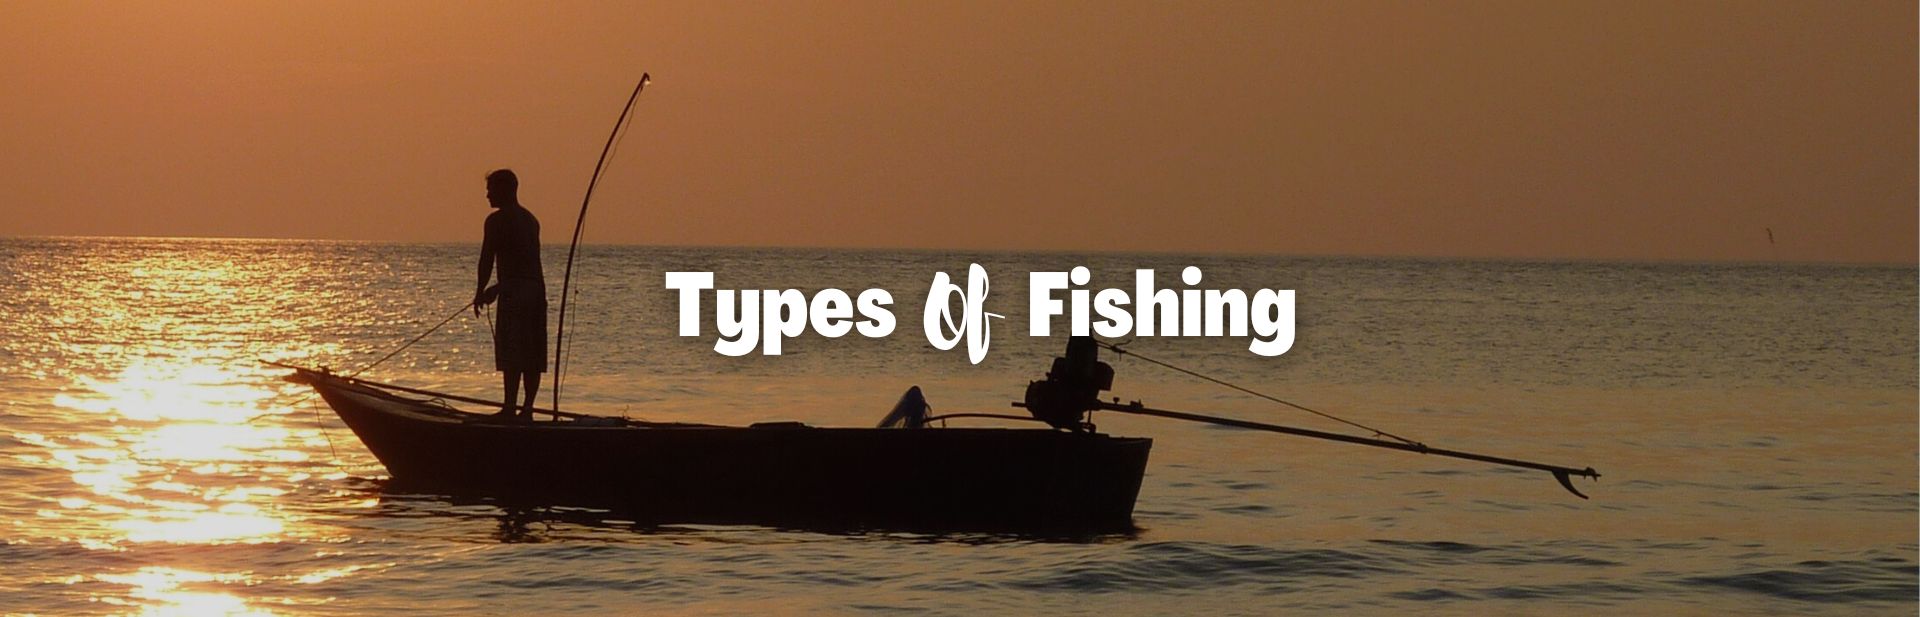 Casting Into the 40 Different Types of Fishing